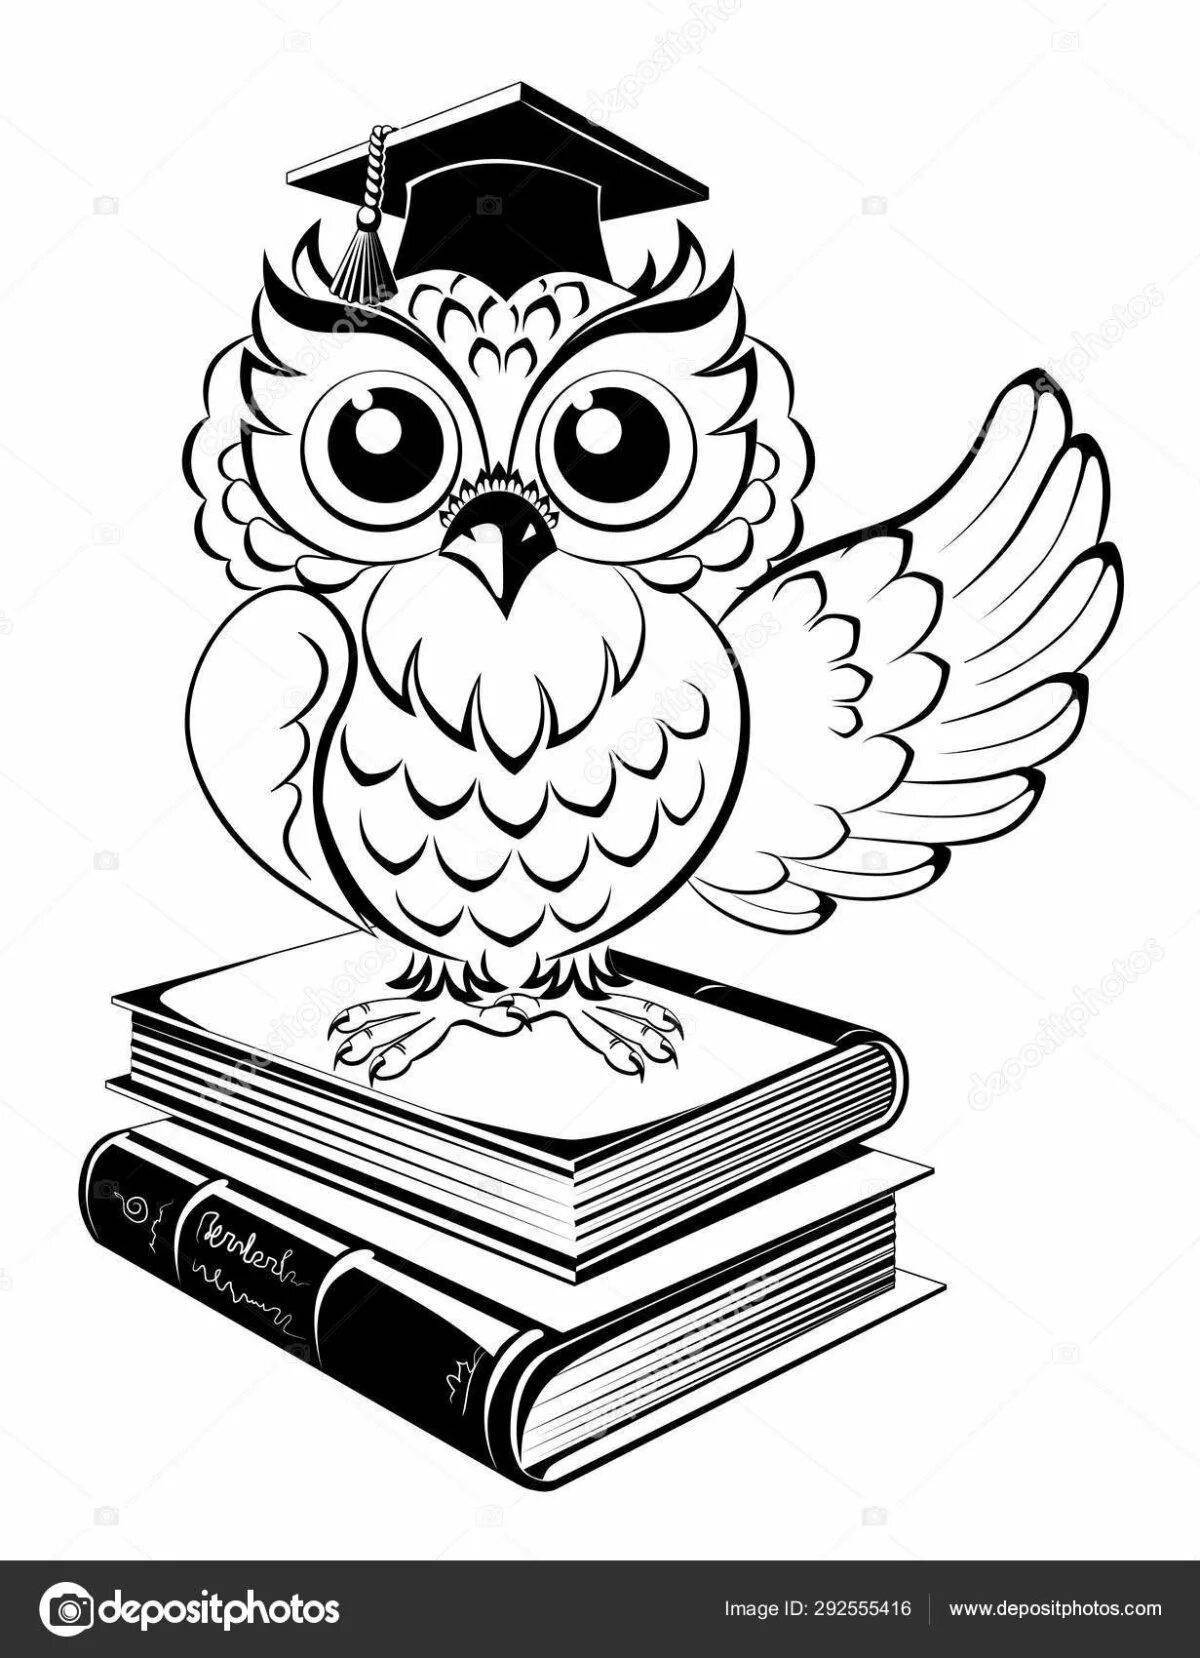 Owl with books #9